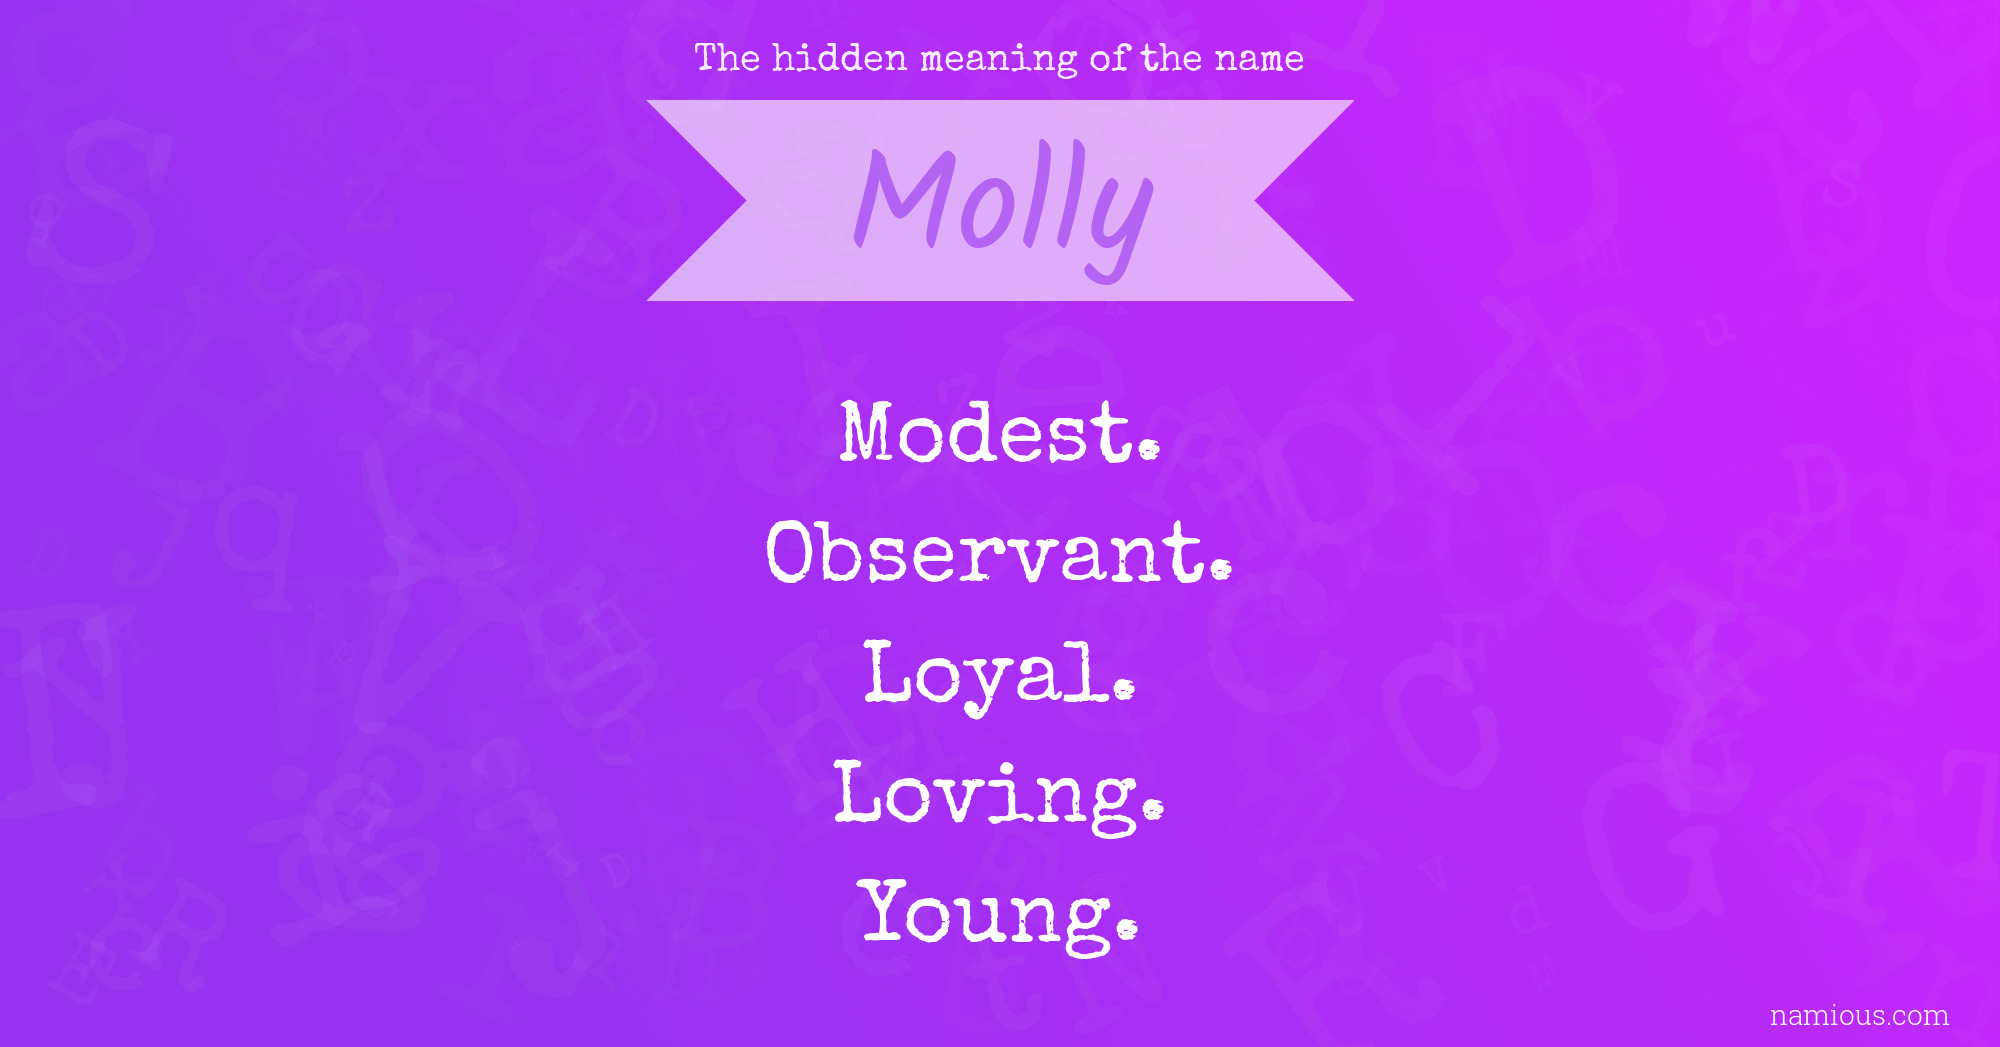 The hidden meaning of the name Molly